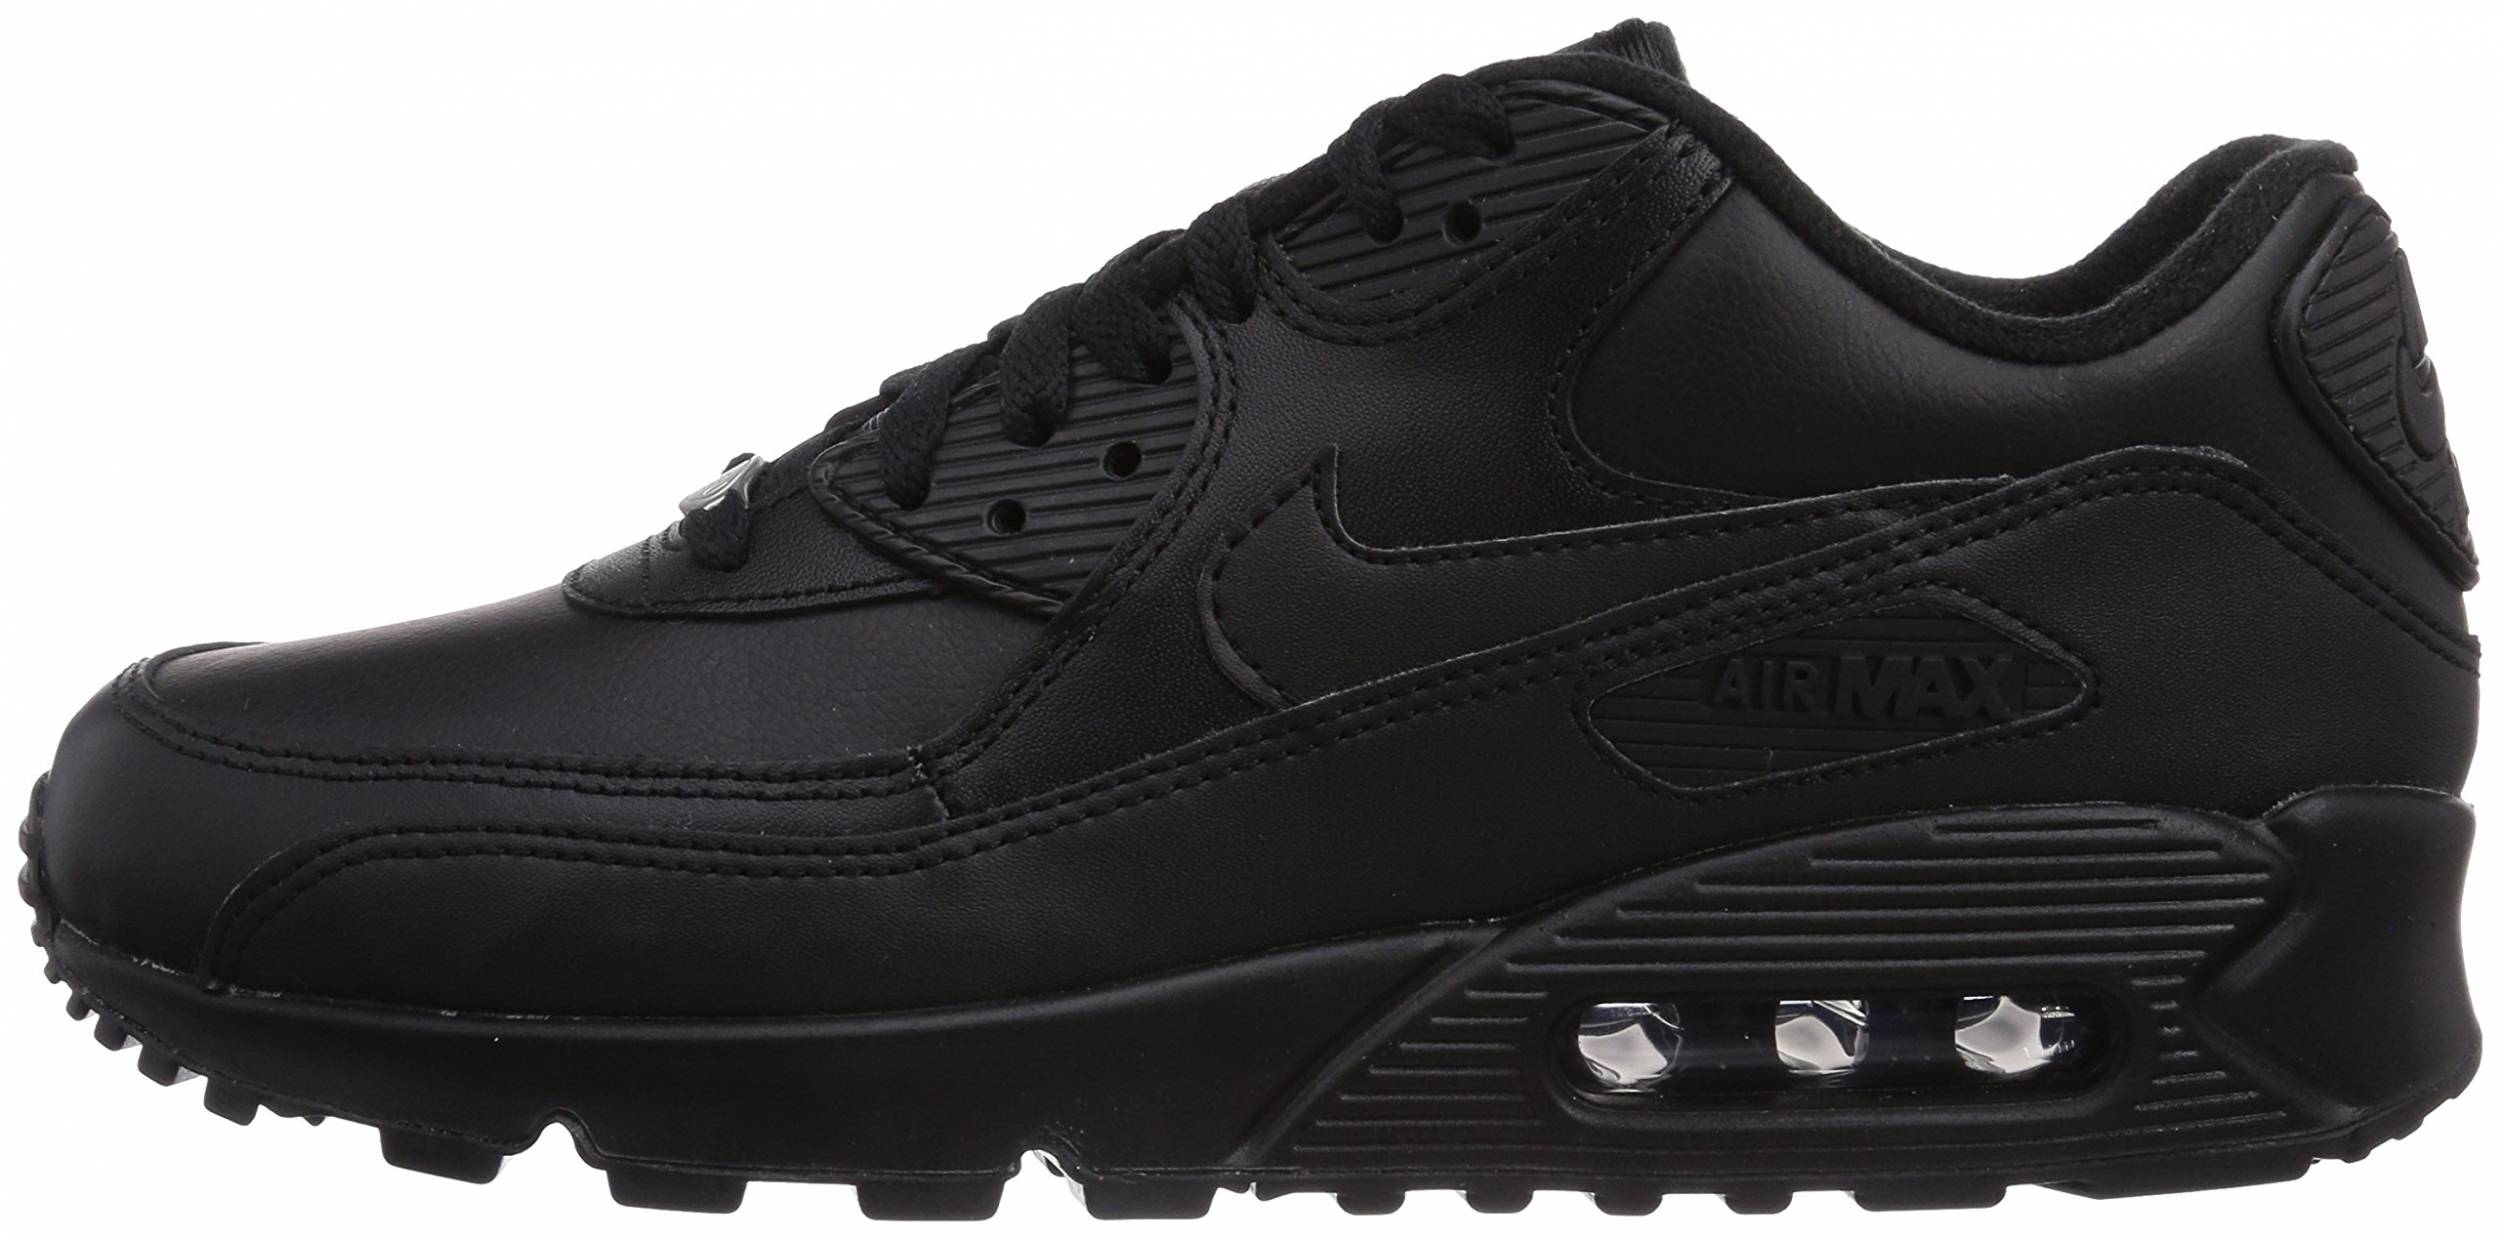 Nike Air Max 90 Leather sneakers in 3 colors (only $60) | RunRepeat